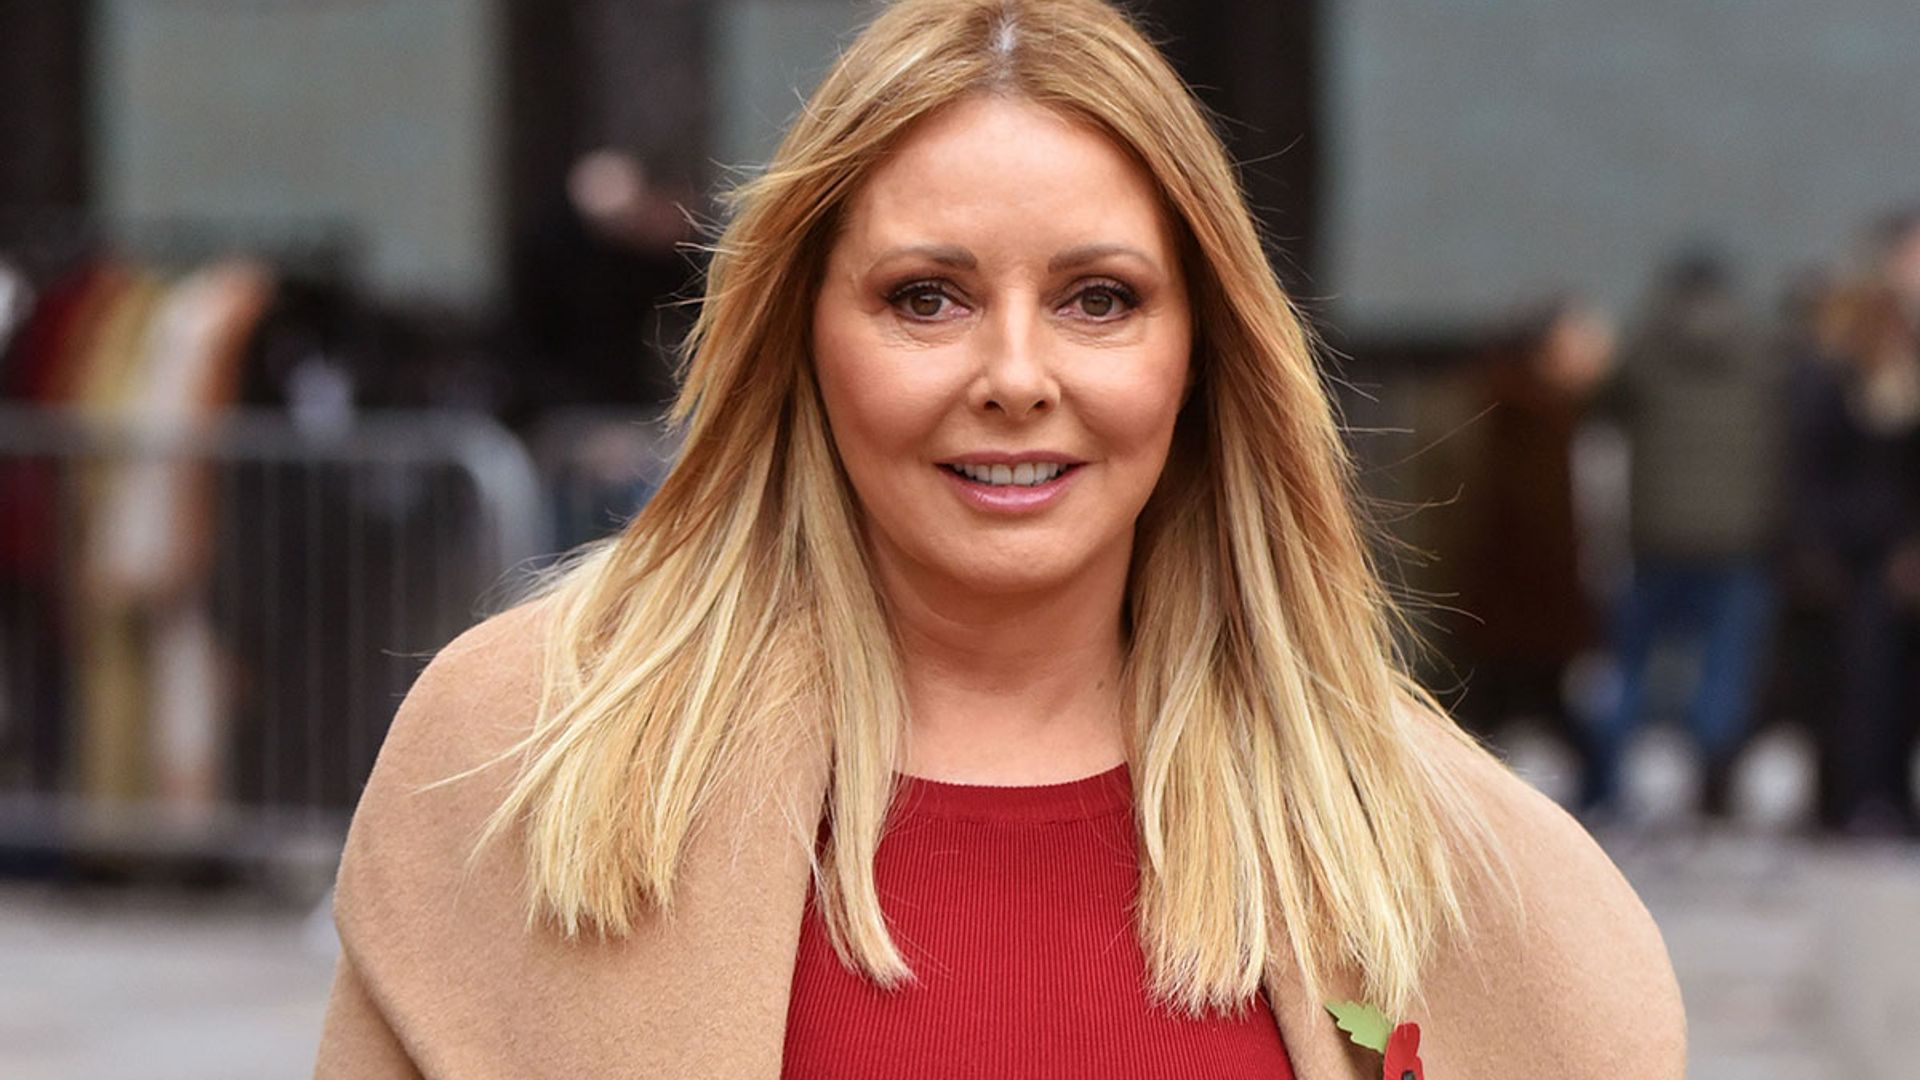 Carol Vorderman Highlights Her Stunning Curves In Sexy Leather Pants In